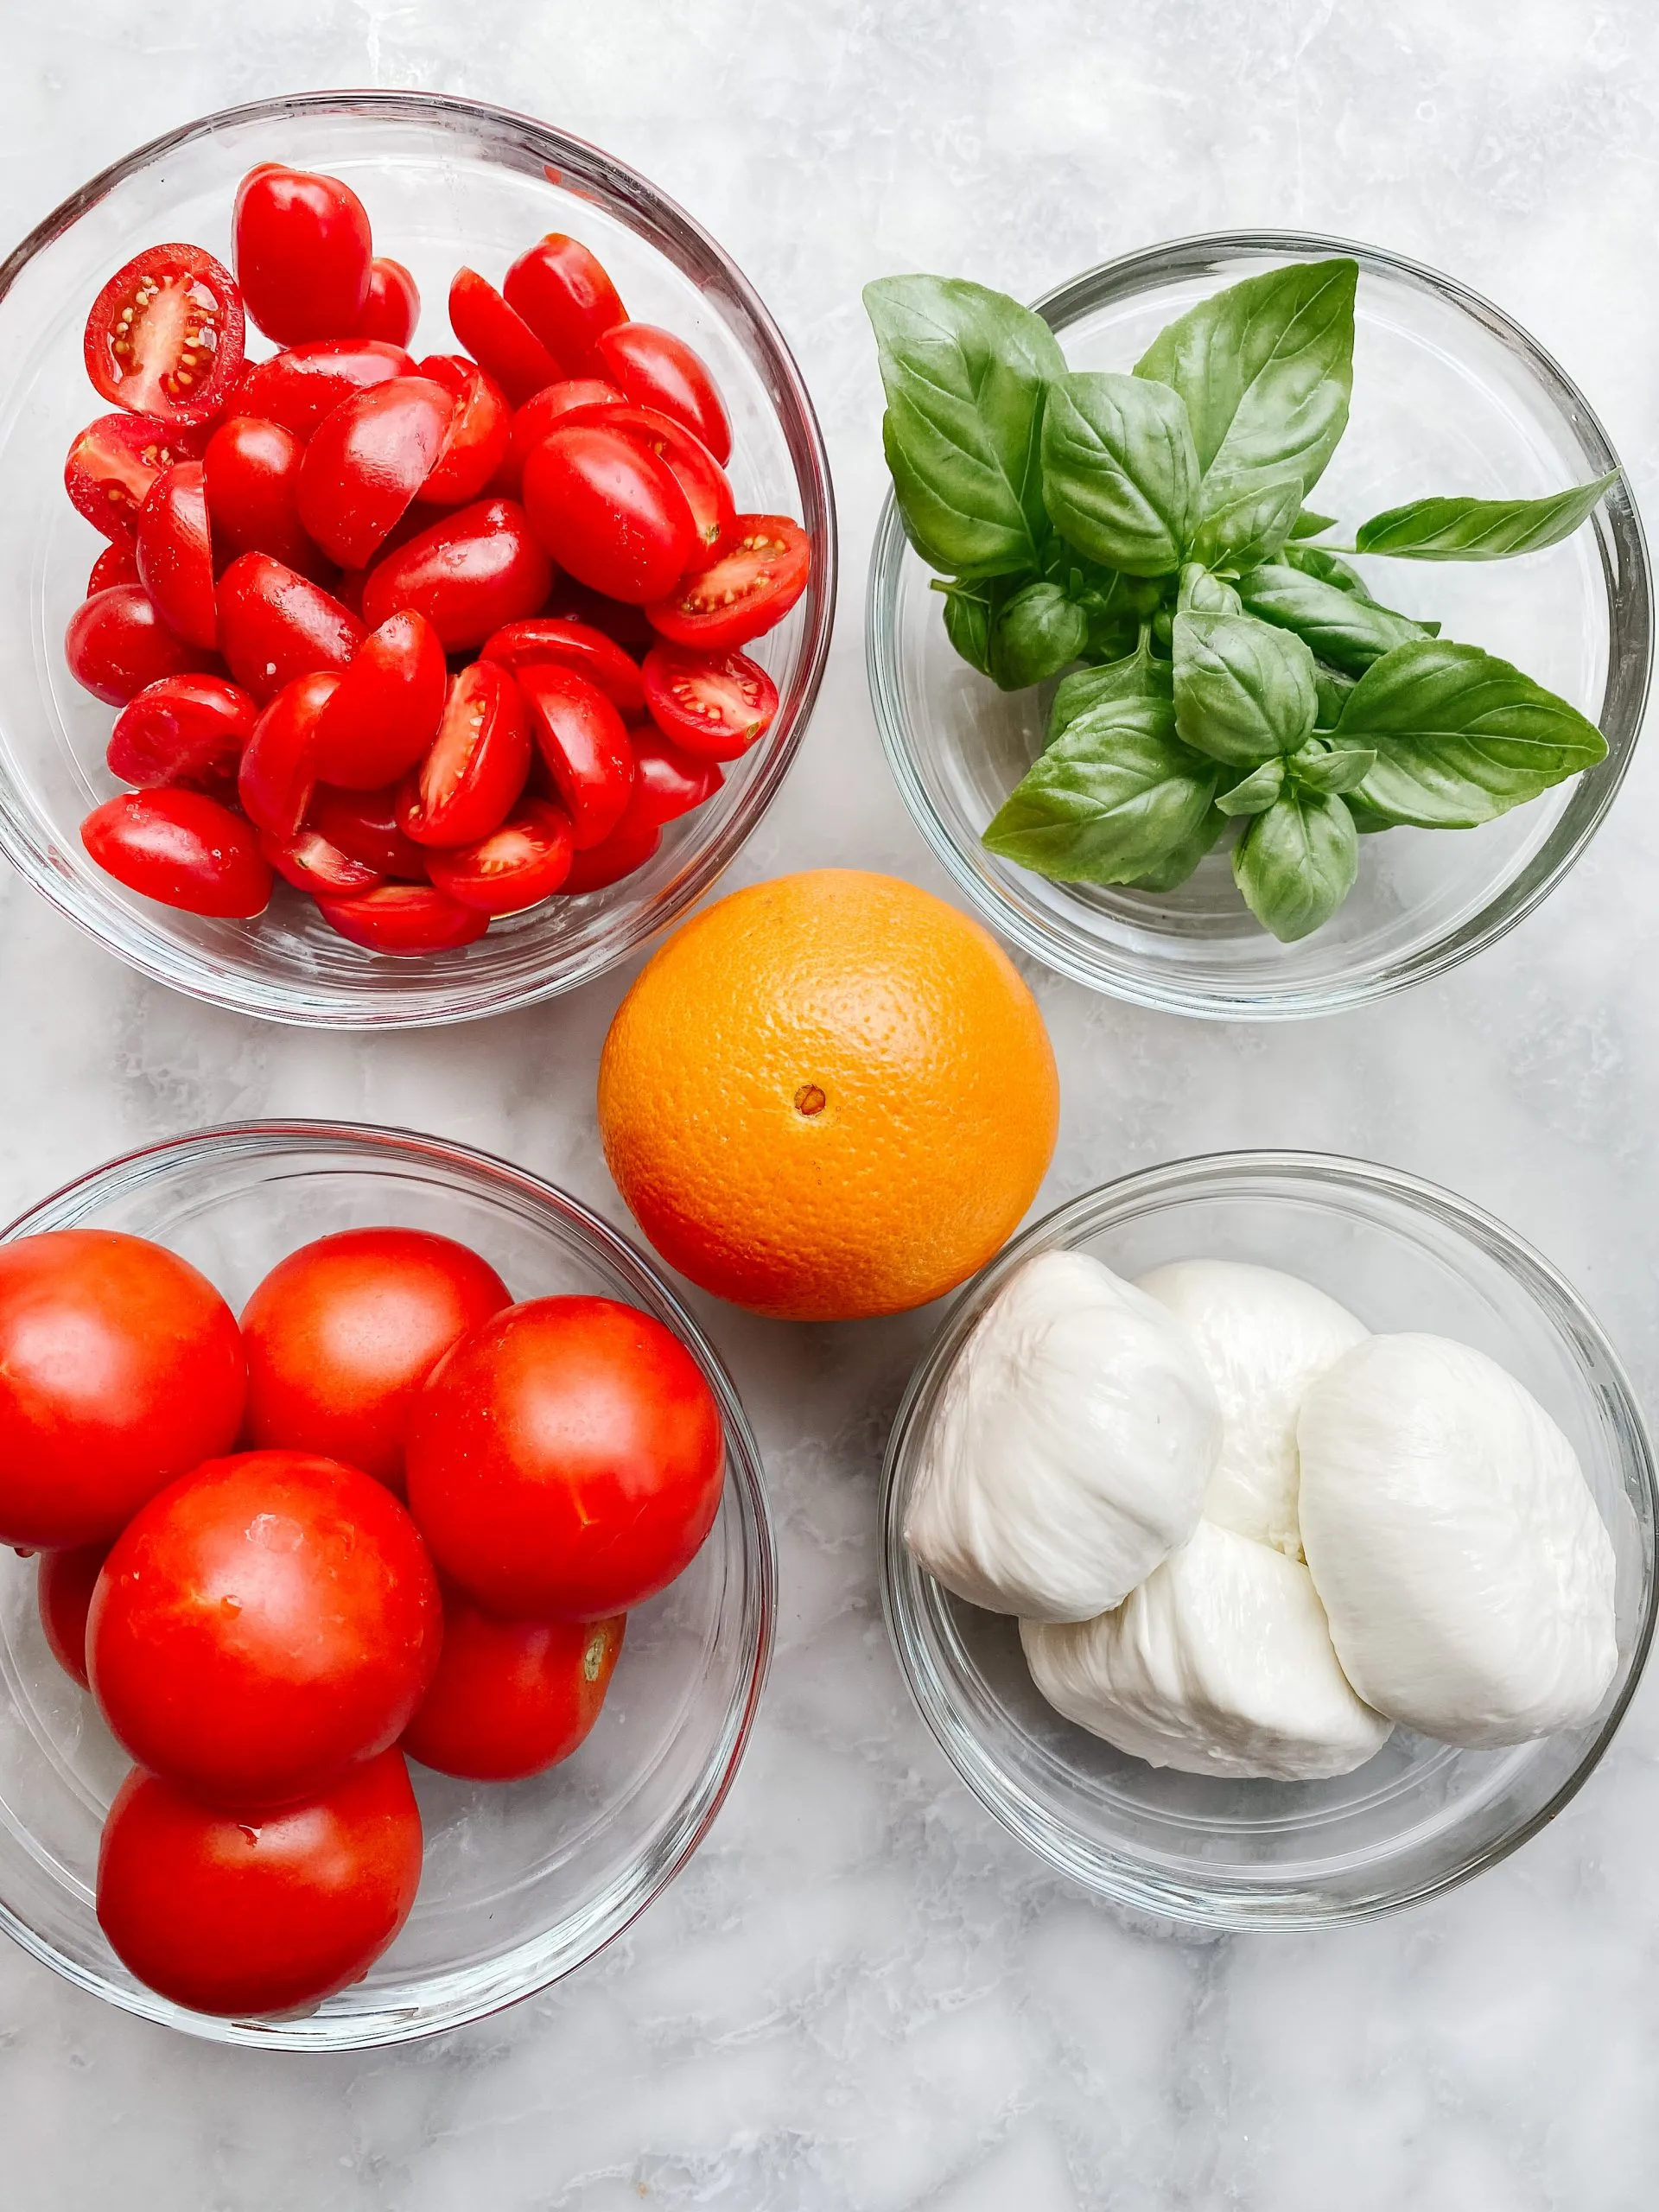 4 glass bowls filled with tomatoes, basil and burrata cheese with an orange in the middle